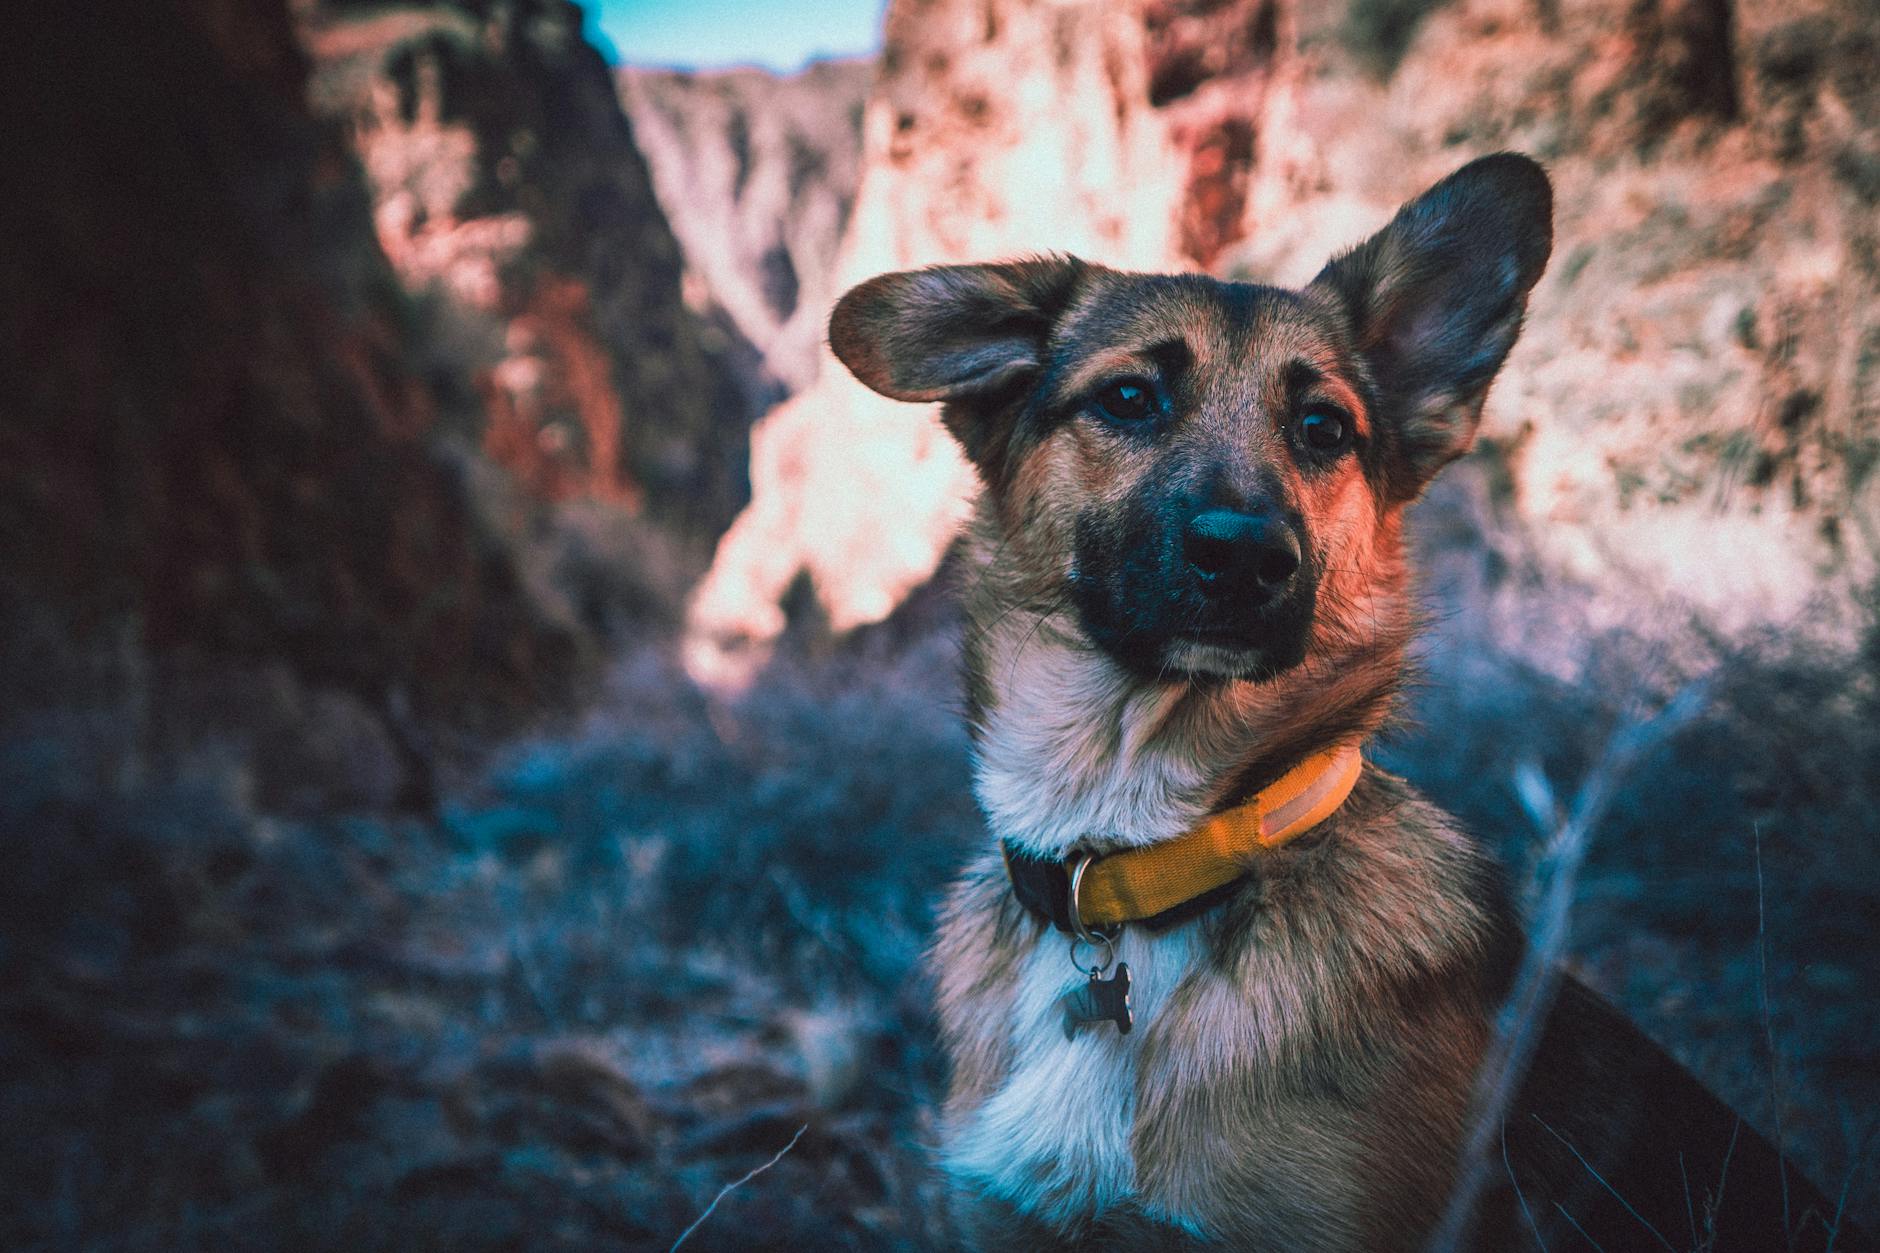 The Beginners Guide To Dog Shock Collar